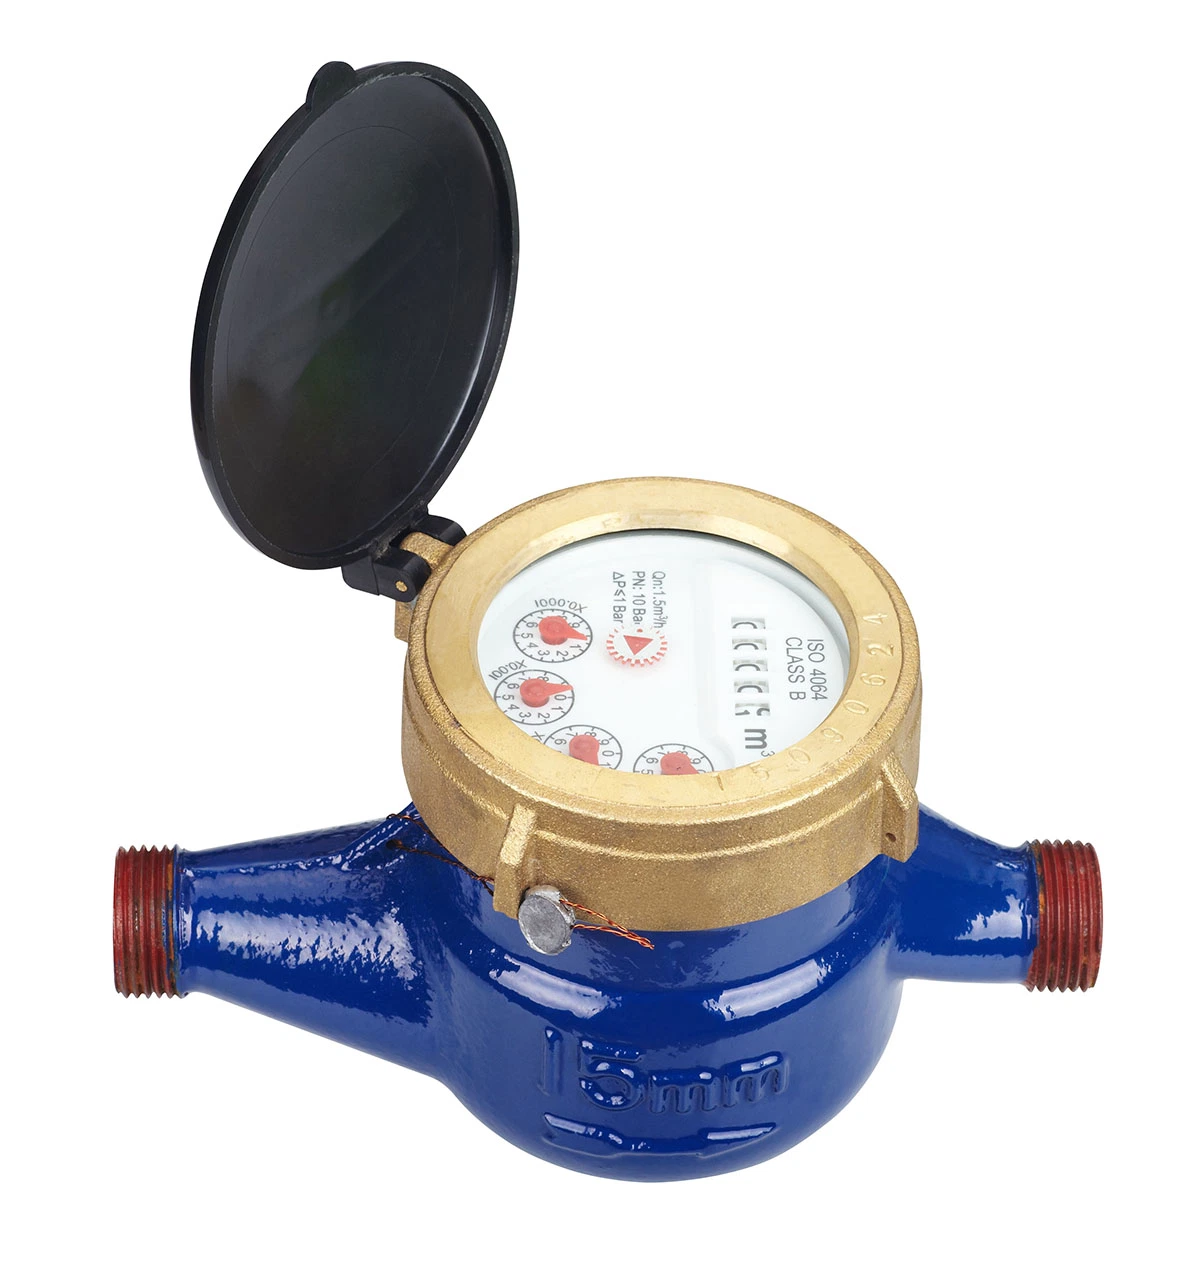 China Multi Jet Dry Flow Meter Cast Iron Body Cold Class B R80 Water Meter Factory